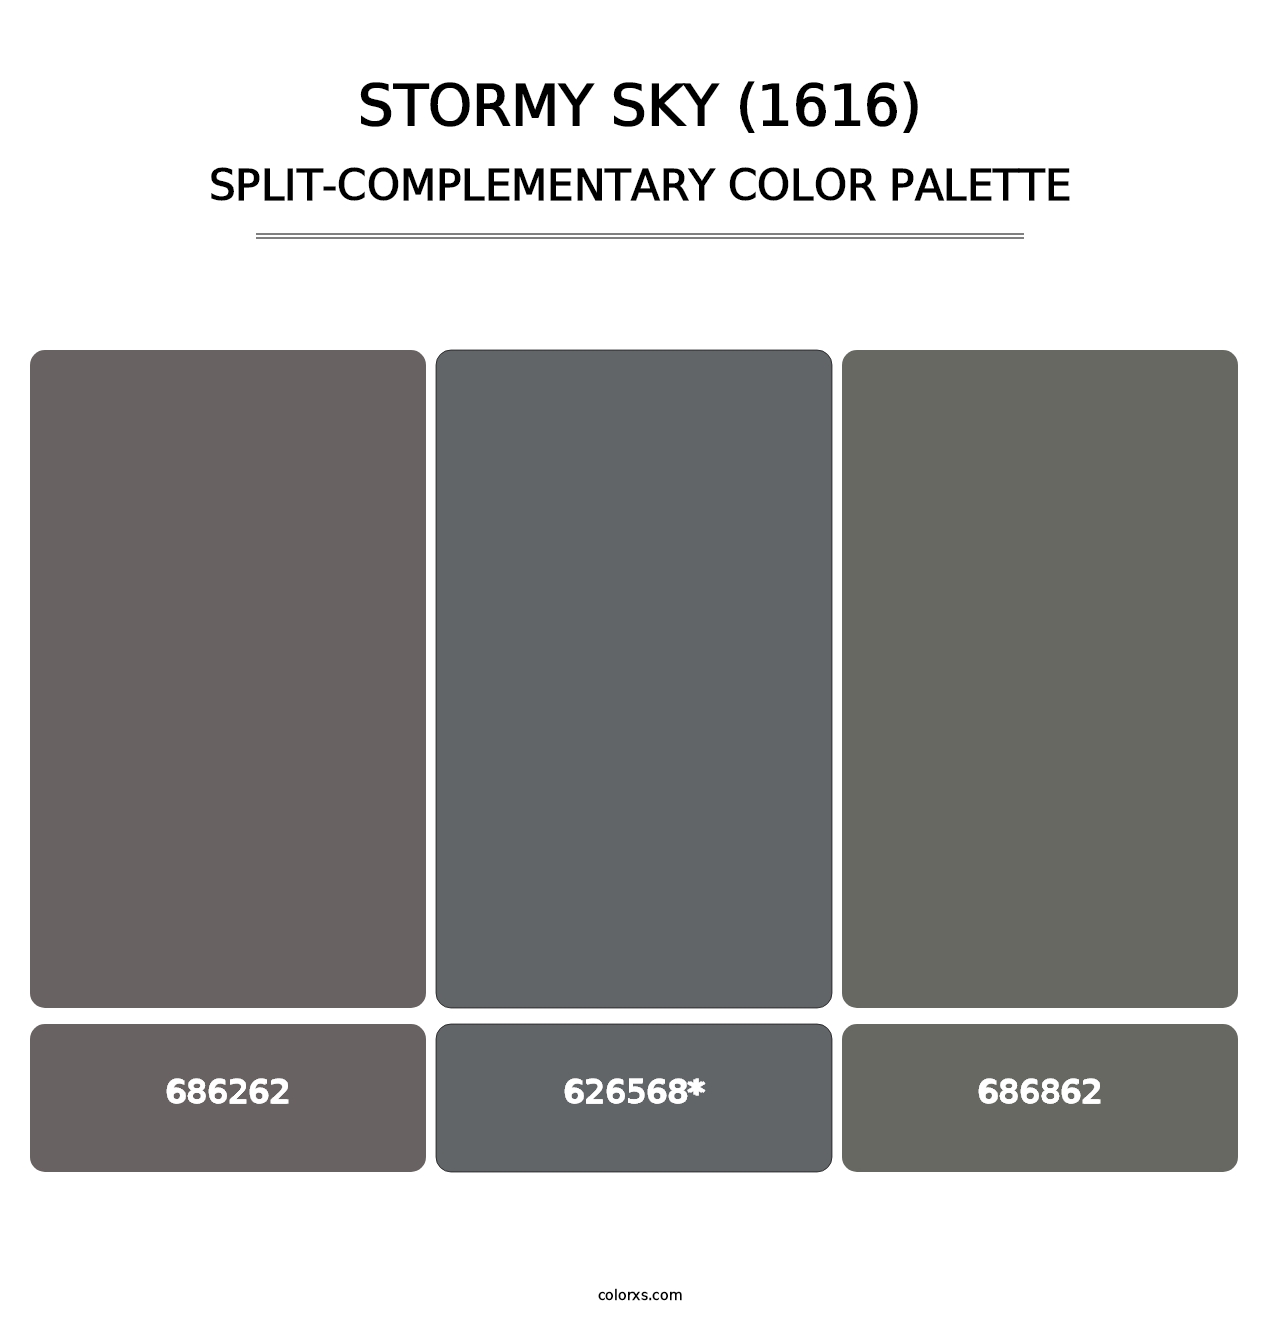 Stormy Sky (1616) - Split-Complementary Color Palette